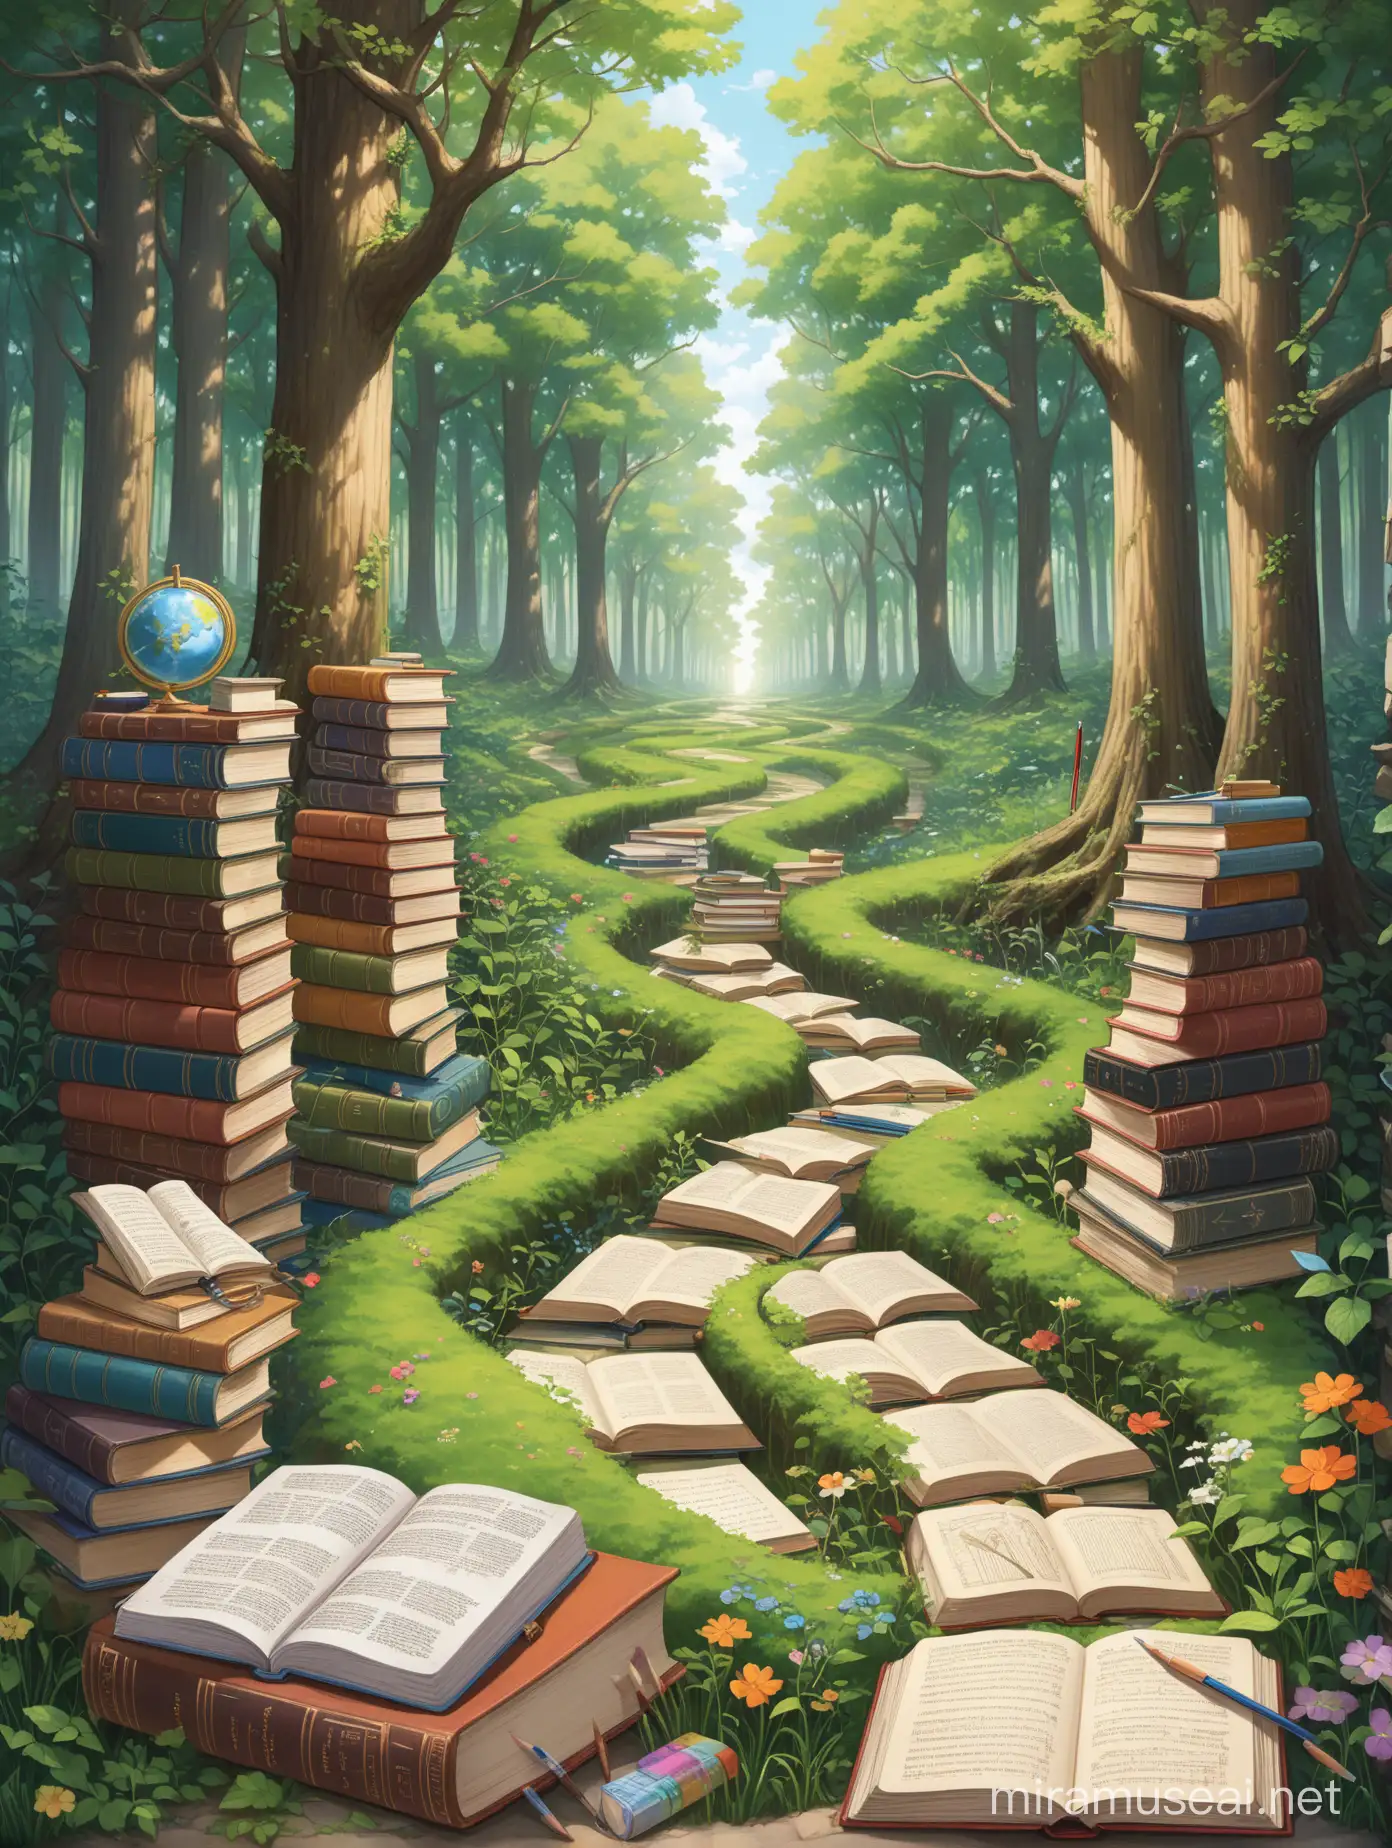 two parallel paths diverging in a forest; one path is well-trodden and straight, there are rigid textbooks and standardized tests, indicative of a system focused on memorization and conformity; the other path is overgrown and winding, is adorned with books, art supplies, and scientific instruments, reflecting a broader, more holistic approach to learning